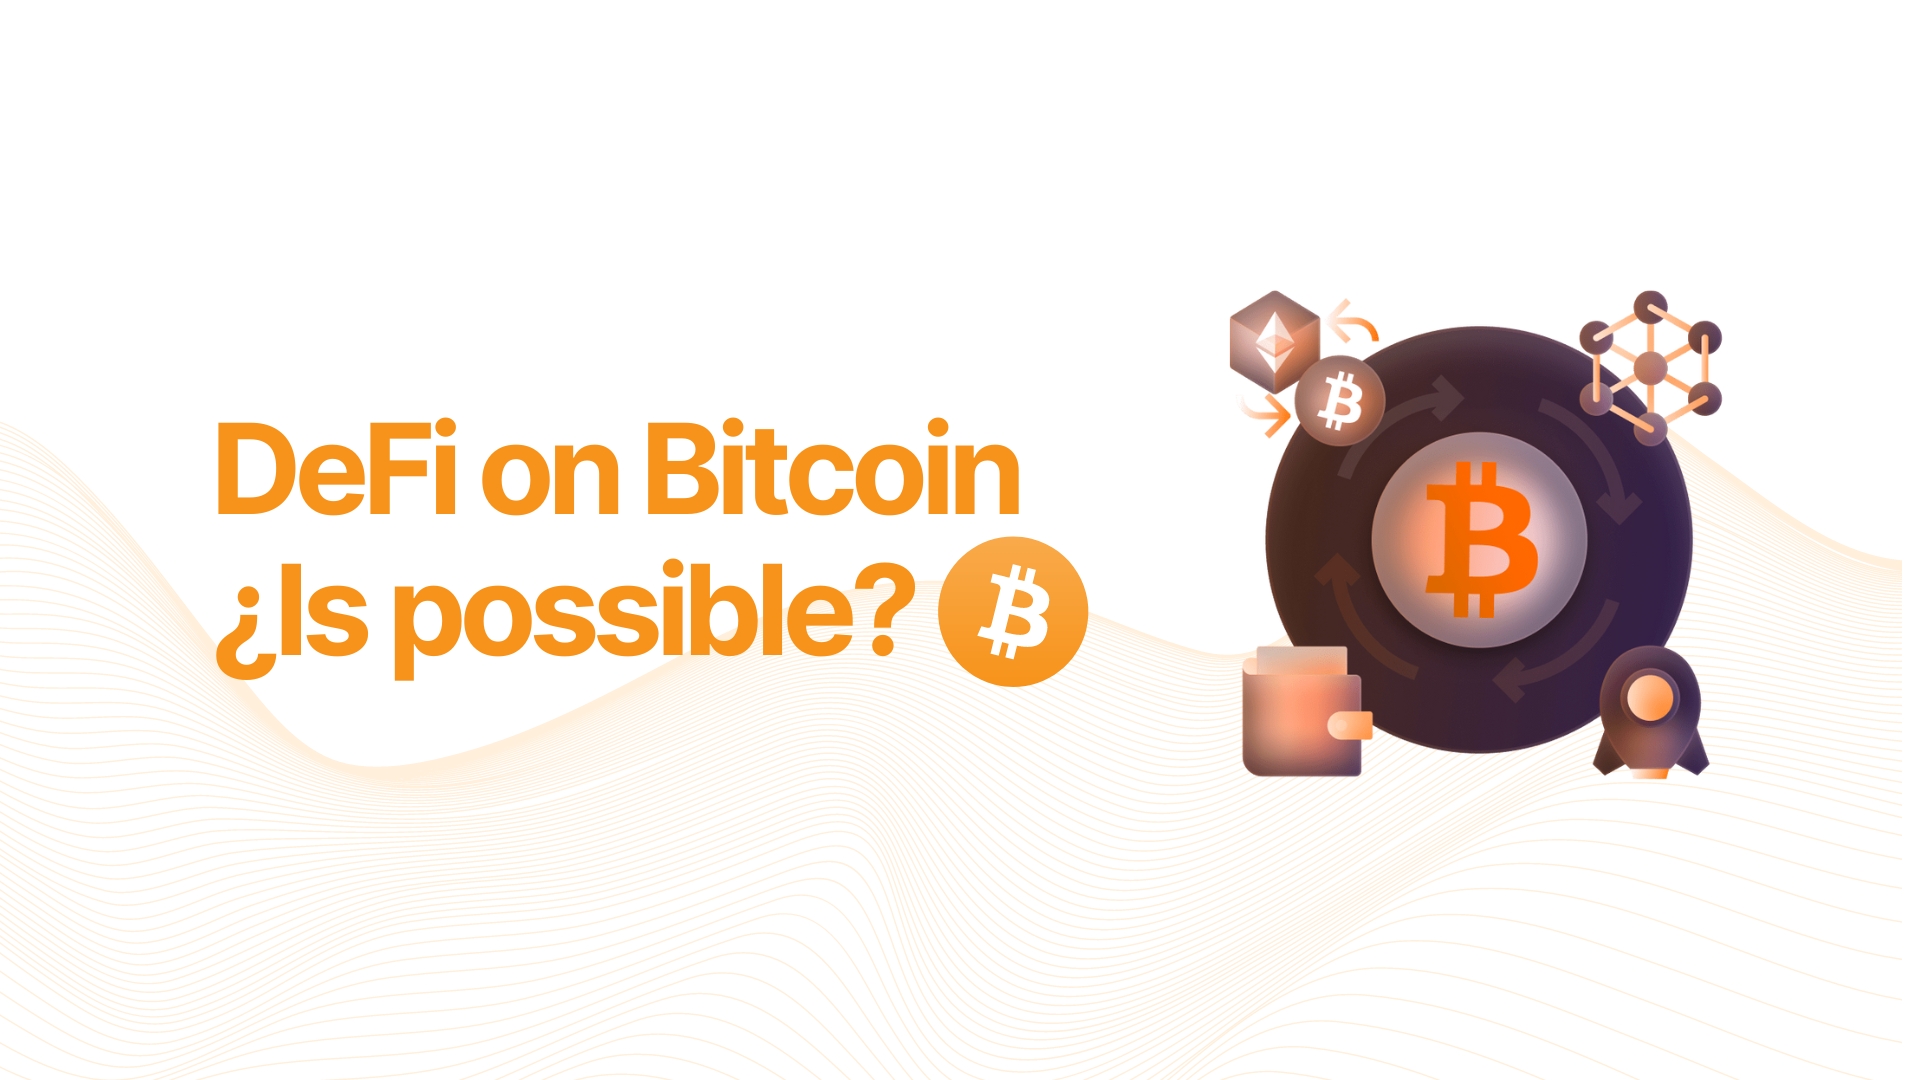 ¿Is possible DeFi on Bitcoin?